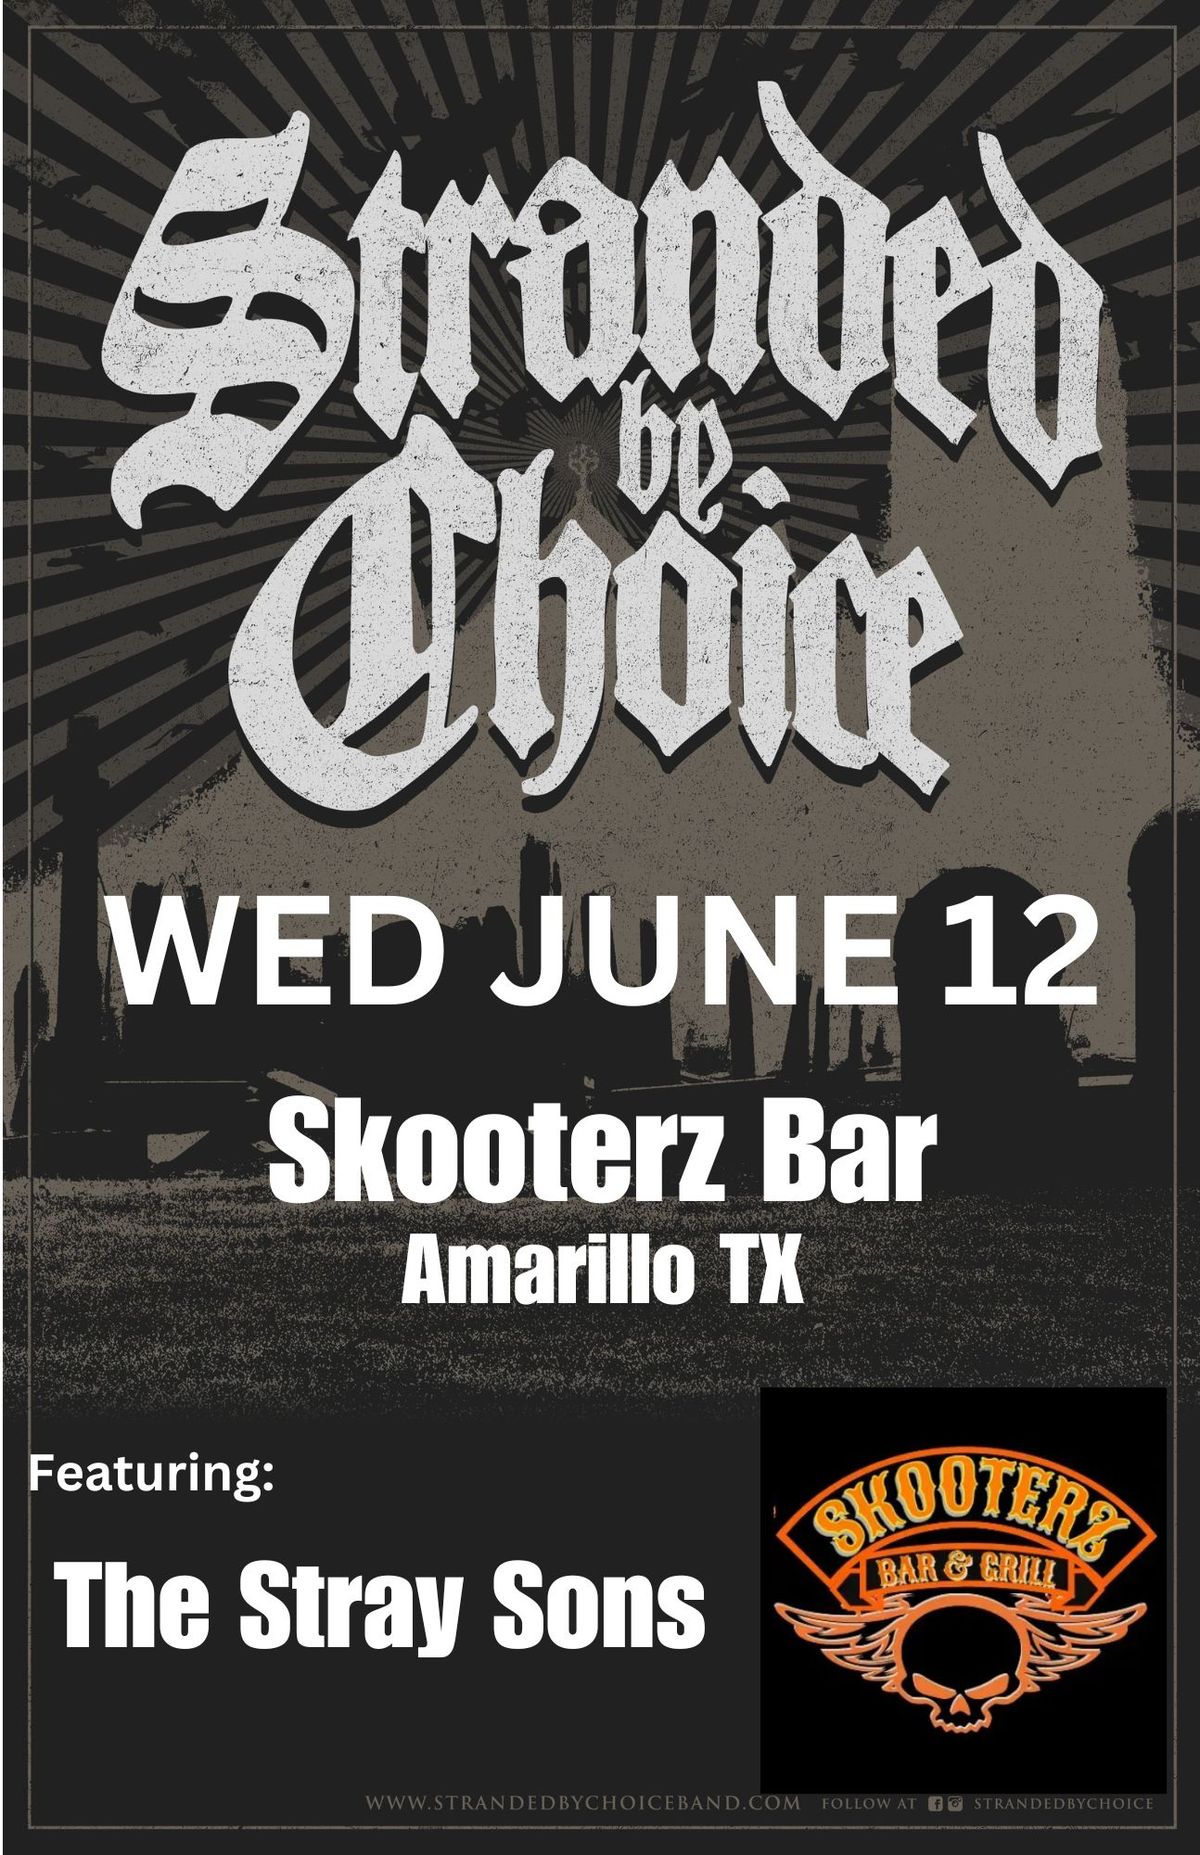 Stranded By Choice | The Stray Sons @Skooterz Bar, Amarillo TX